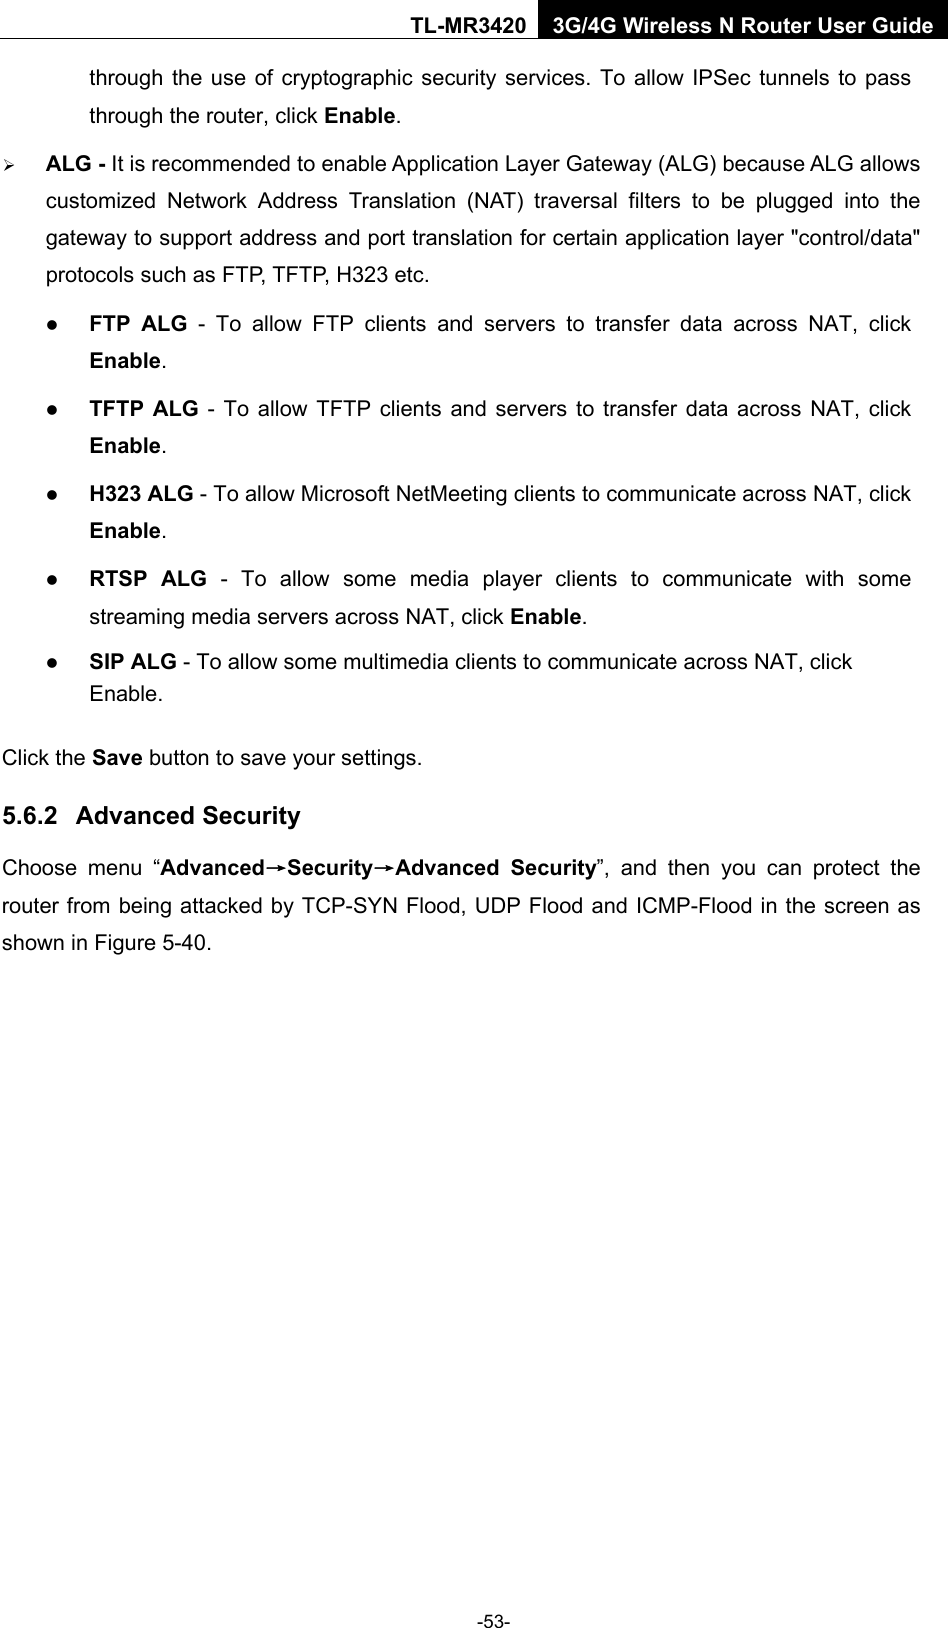    -53- TL-MR3420 3G/4G Wireless N Router User Guide through the use of cryptographic security services. To allow IPSec tunnels to pass through the router, click Enable.  ALG - It is recommended to enable Application Layer Gateway (ALG) because ALG allows customized Network Address Translation (NAT) traversal filters to be plugged into the gateway to support address and port translation for certain application layer &quot;control/data&quot; protocols such as FTP, TFTP, H323 etc.    FTP ALG  -  To allow FTP clients and servers to transfer data across NAT, click Enable.  TFTP ALG - To allow TFTP clients and servers to transfer data across NAT, click Enable.  H323 ALG - To allow Microsoft NetMeeting clients to communicate across NAT, click Enable.  RTSP ALG - To allow some media player clients to communicate with some streaming media servers across NAT, click Enable.  SIP ALG - To allow some multimedia clients to communicate across NAT, click Enable. Click the Save button to save your settings. 5.6.2 Advanced Security Choose menu “Advanced→Security→Advanced Security”, and then you can protect the router from being attacked by TCP-SYN Flood, UDP Flood and ICMP-Flood in the screen as shown in Figure 5-40.   